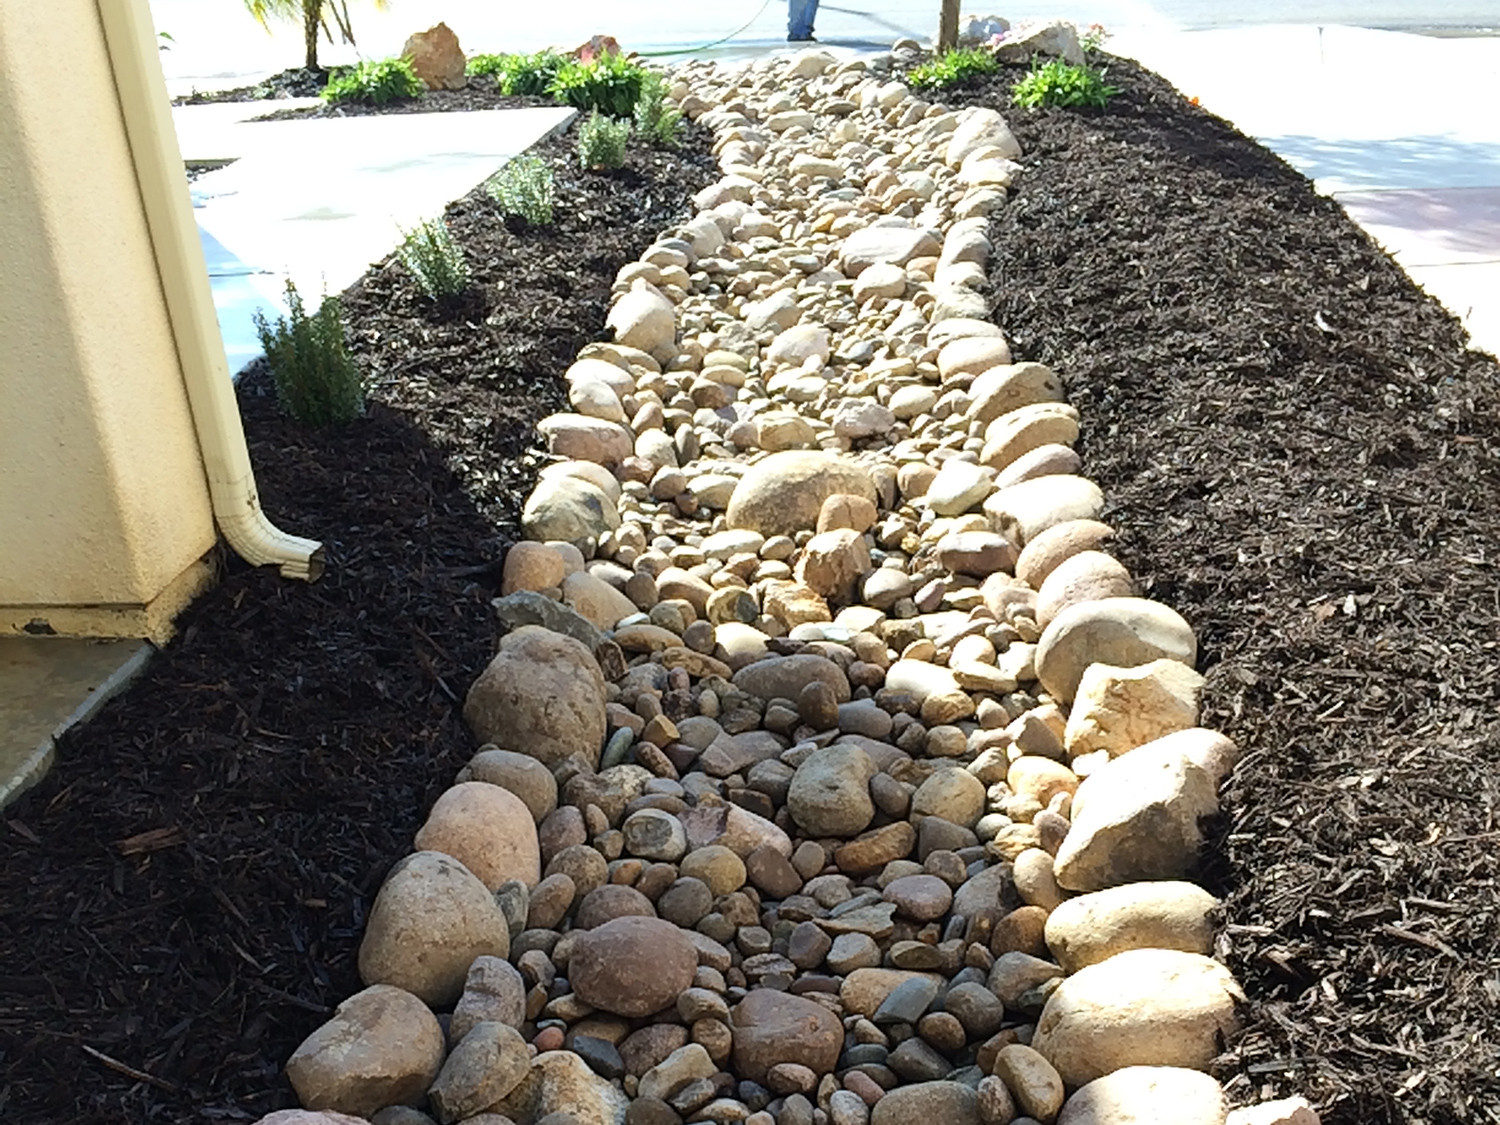 Dry river bed and mulch beds on the side of a house.